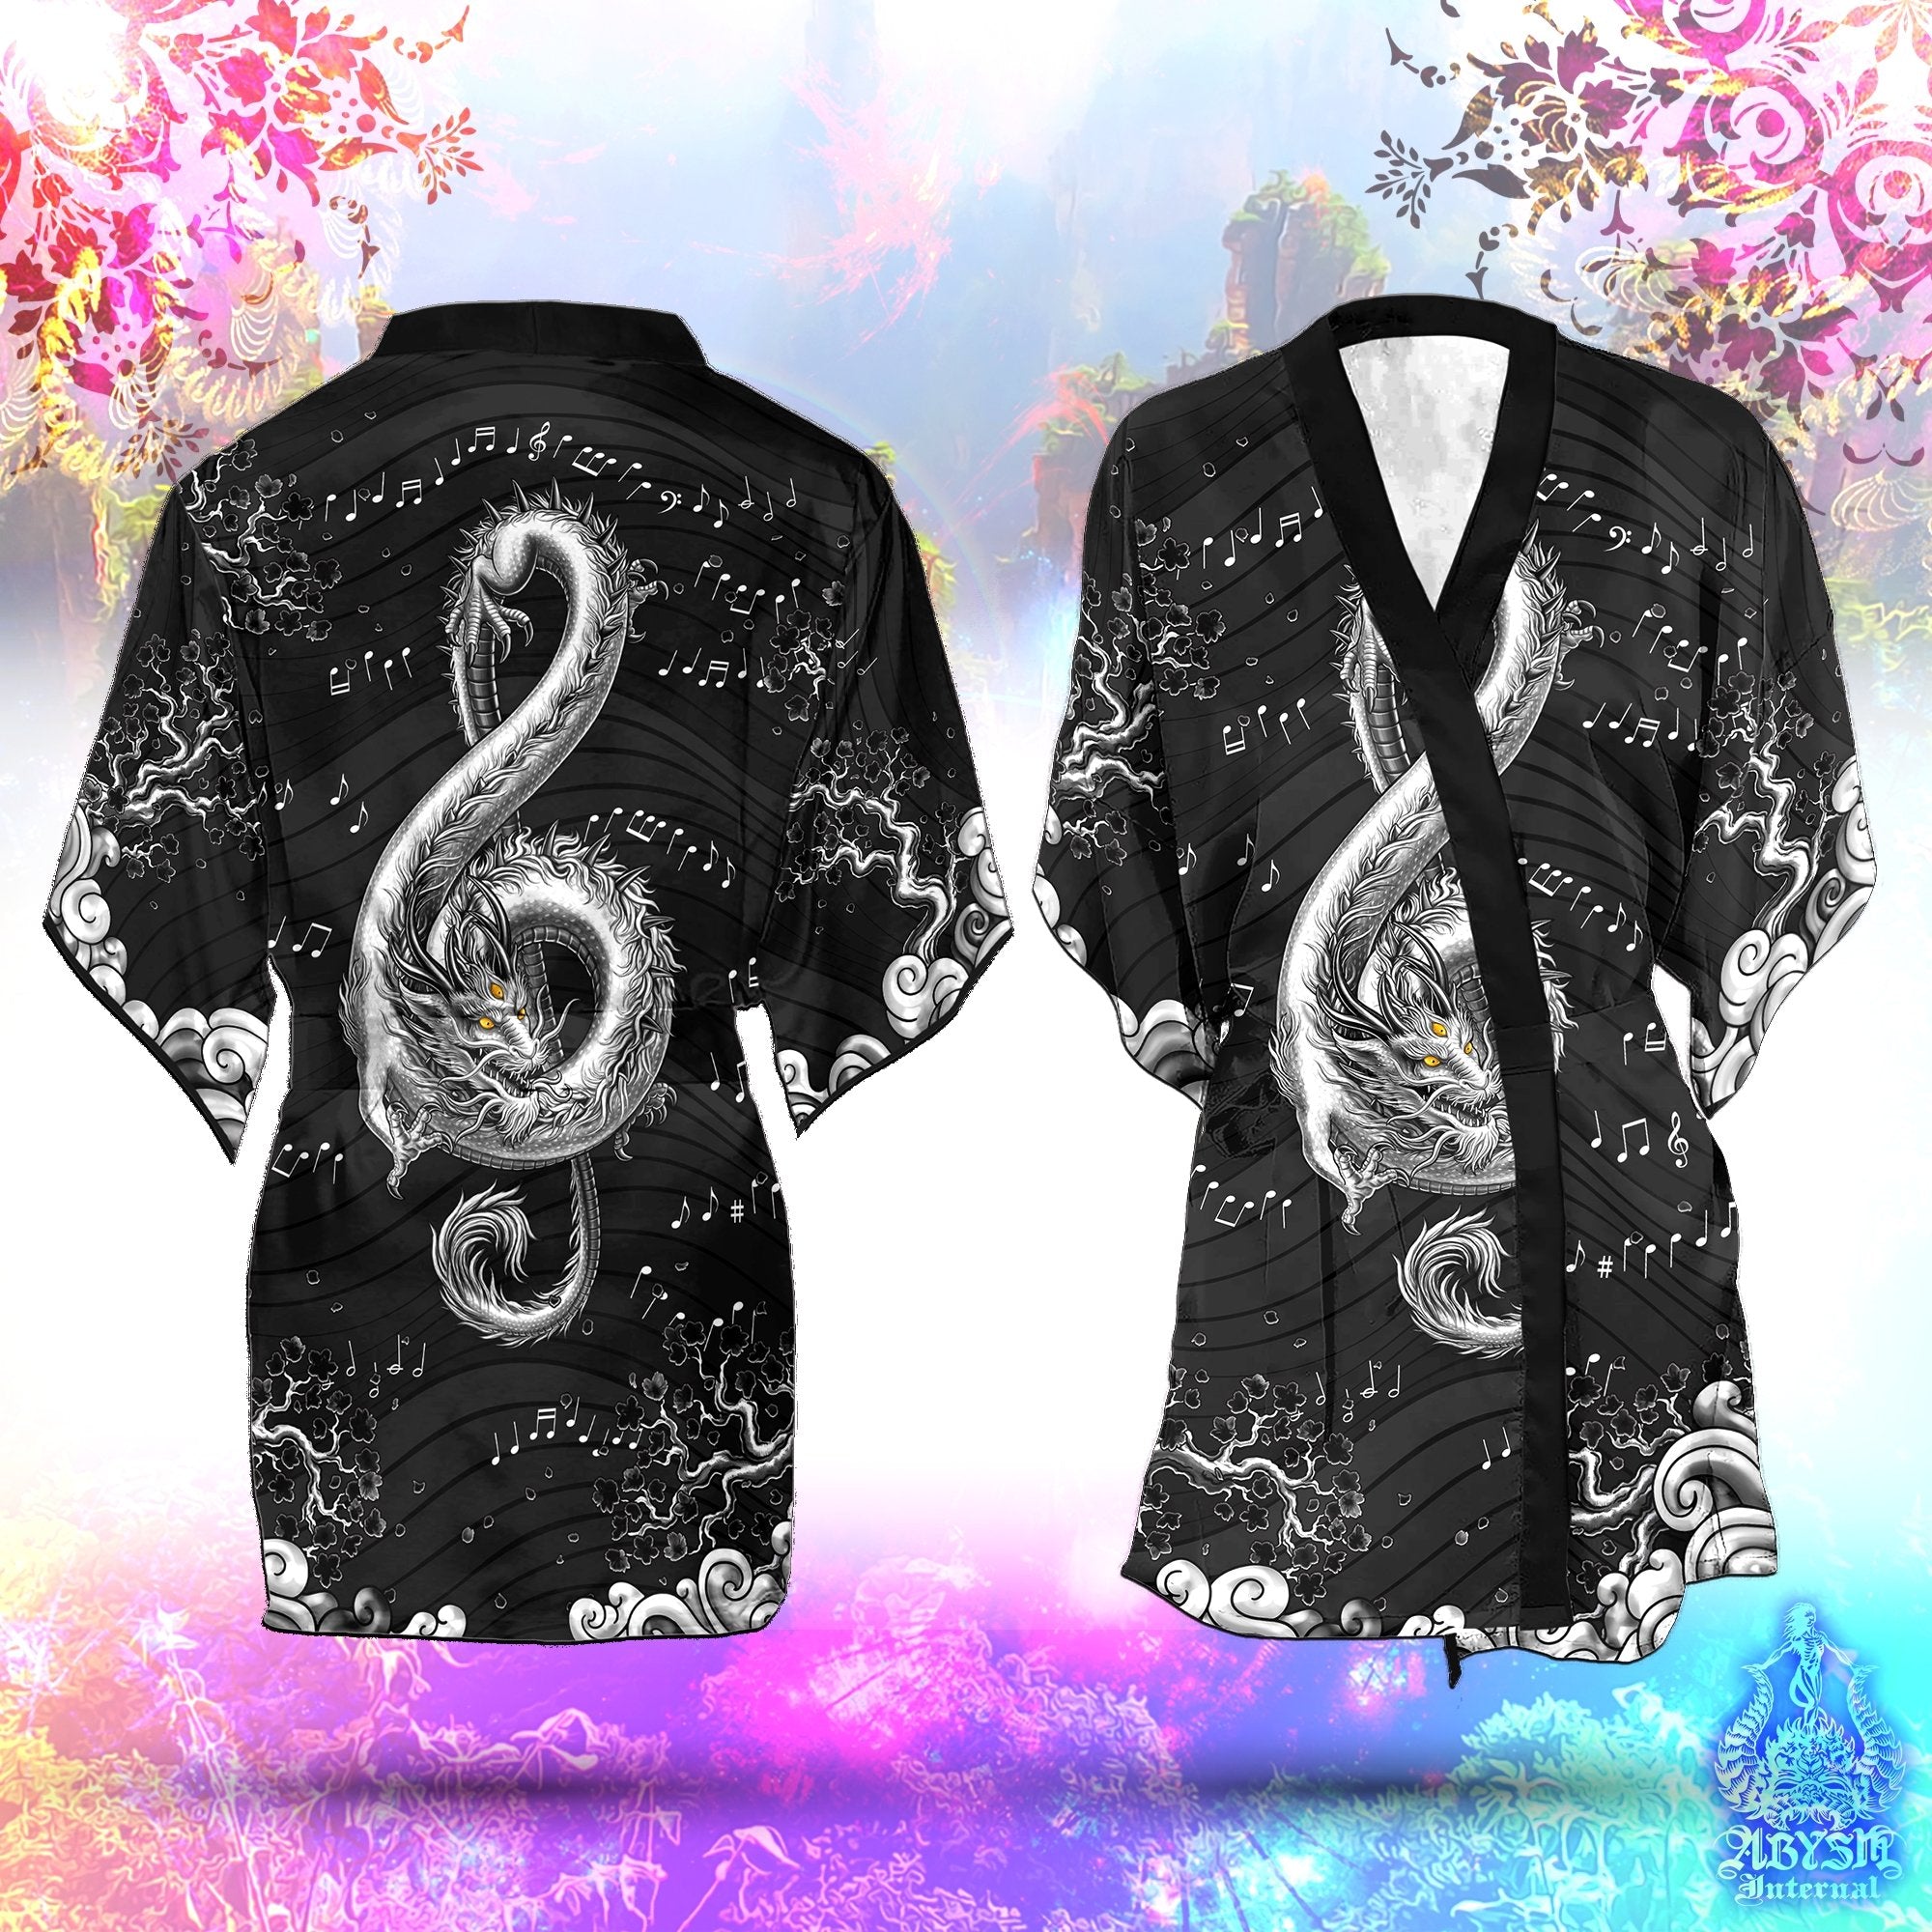 Music Cover Up, Beach Outfit, Party Kimono, Summer Festival Robe, Indie and Alternative Clothing, Unisex - Dragon, Black and White - Abysm Internal